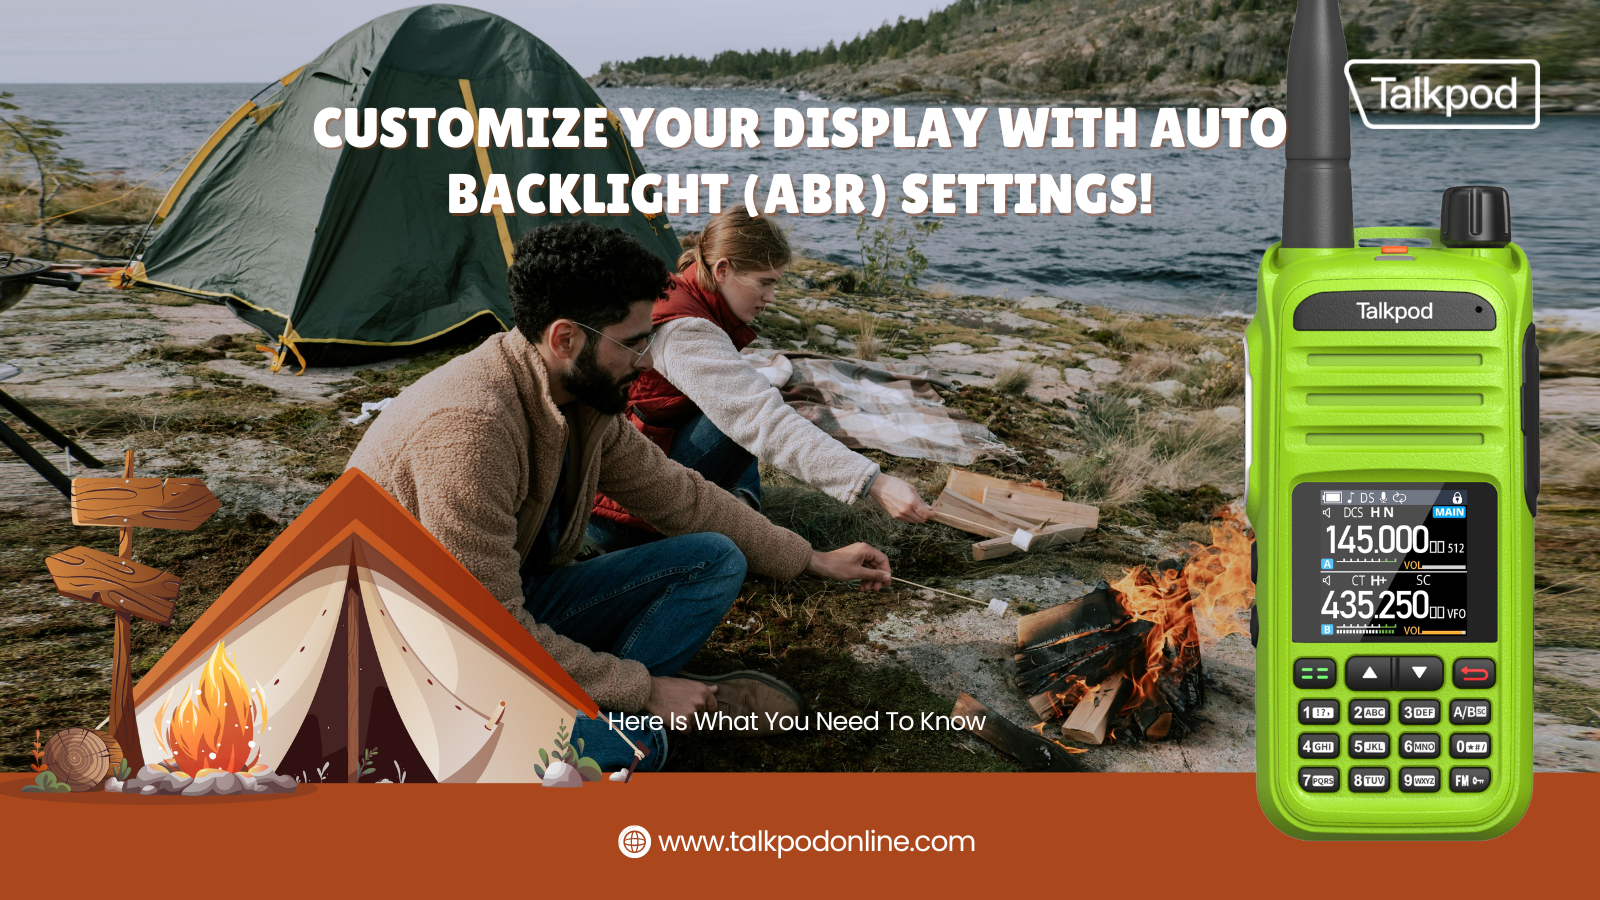 Customize Your Display with Auto Backlight (ABR) Settings!